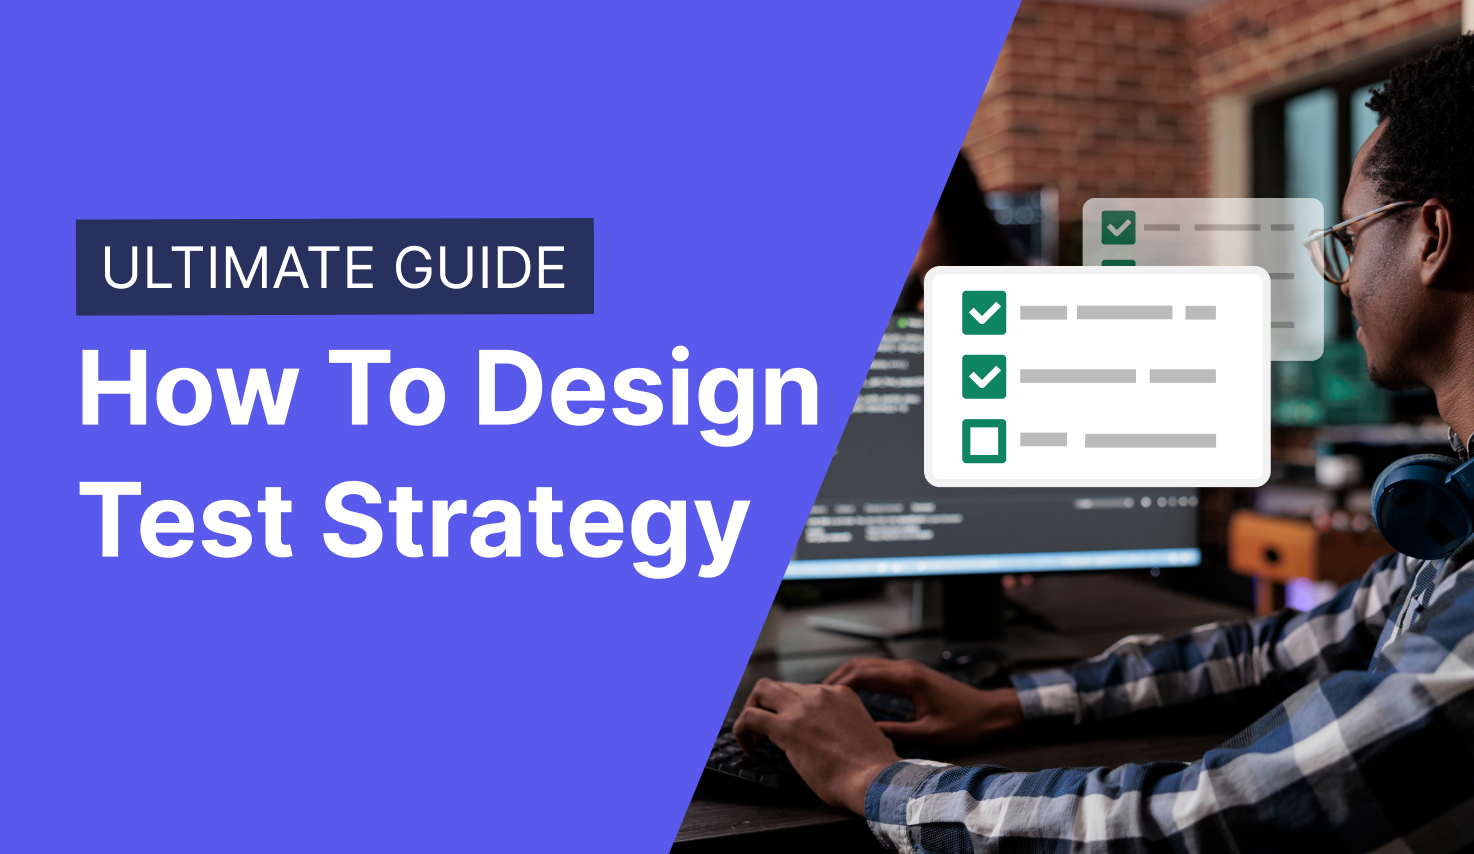 Ultimate Guide to designing Test Strategy